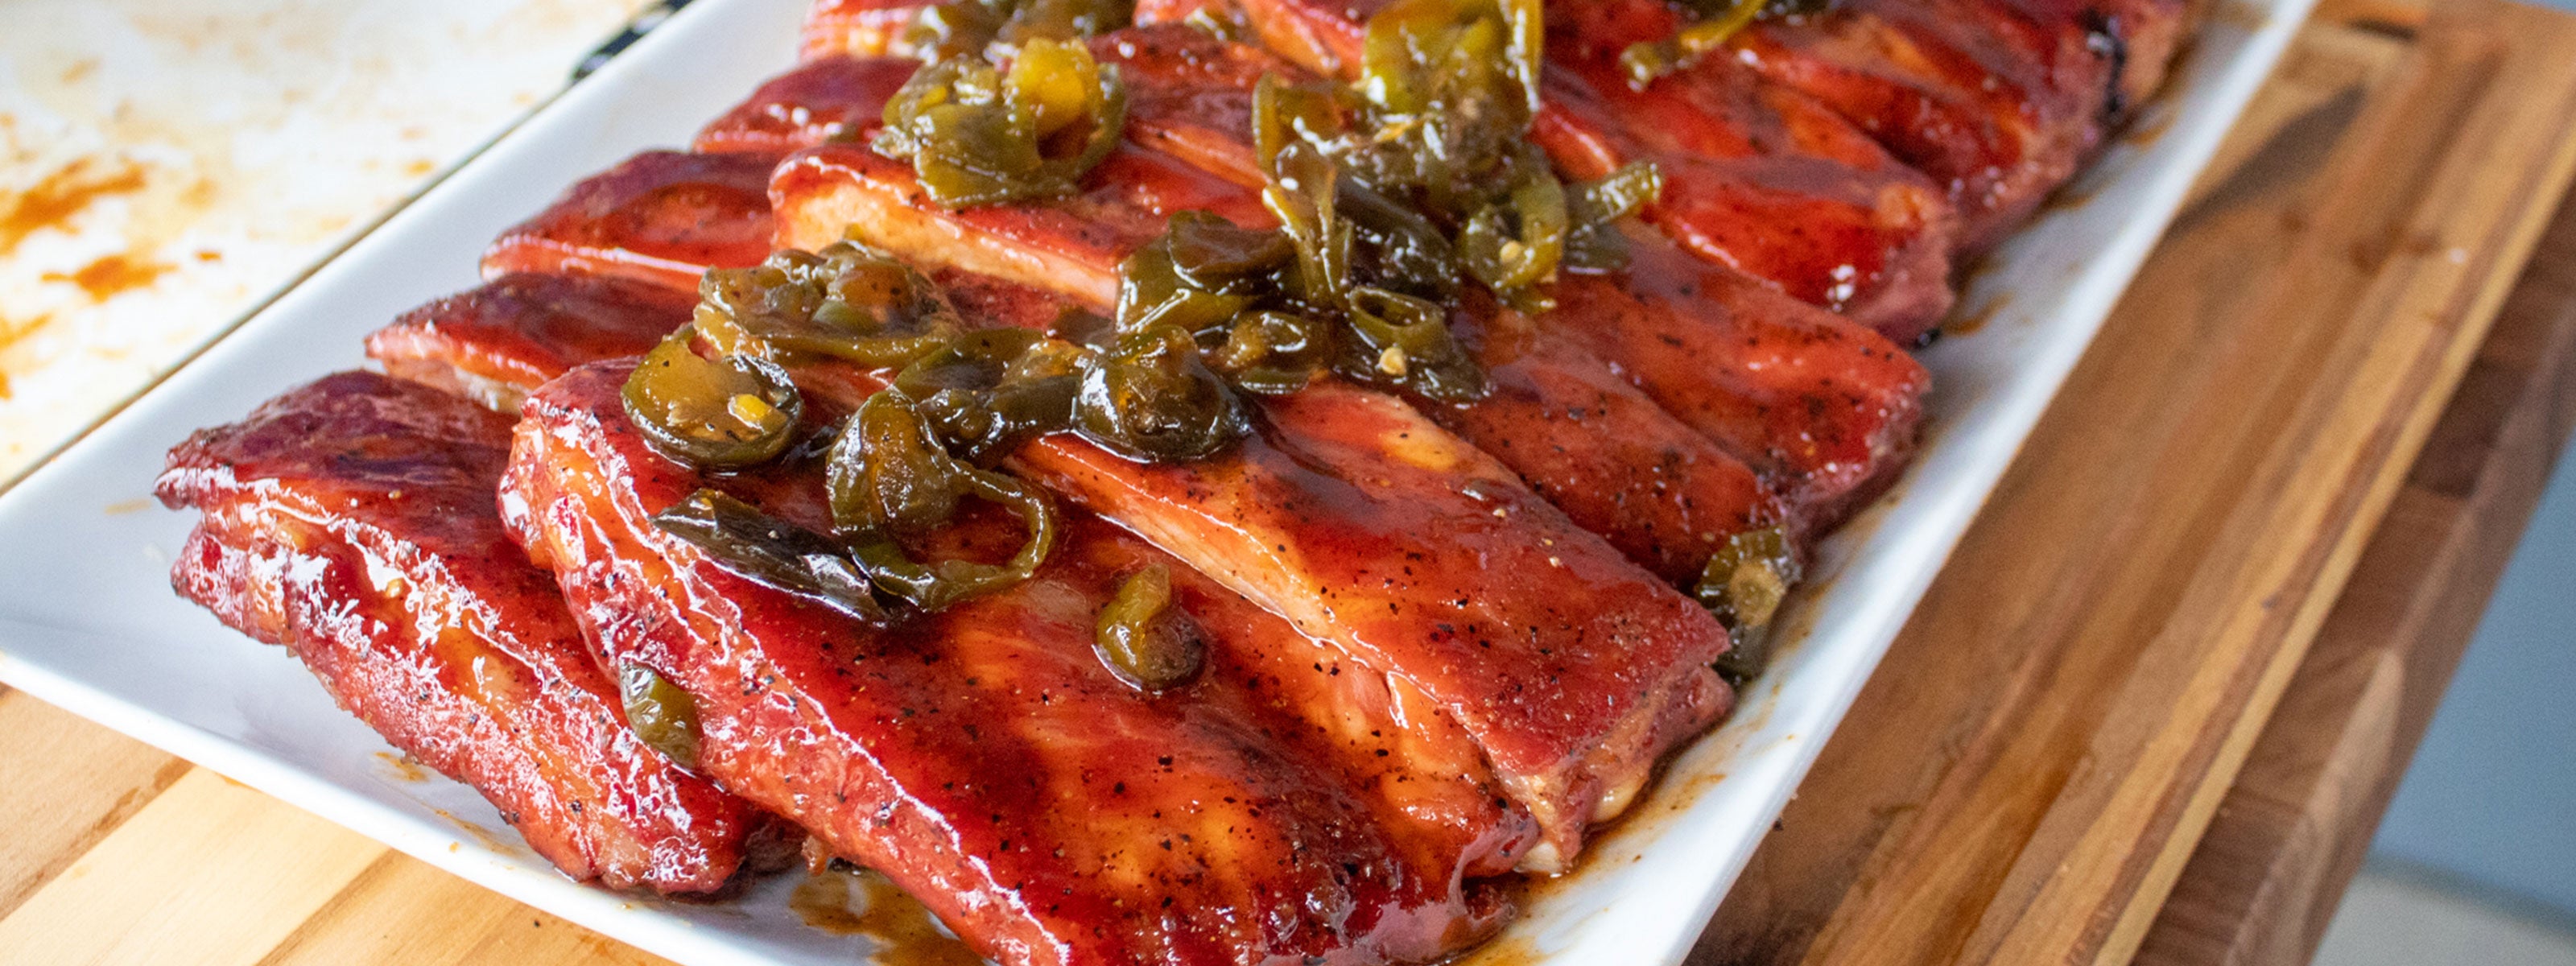 ### Alt Text: **Plate of mouthwatering ribs seasoned with Big Poppa's Sweet Money, topped with Granny's Sauce and slices of jalapeno.**